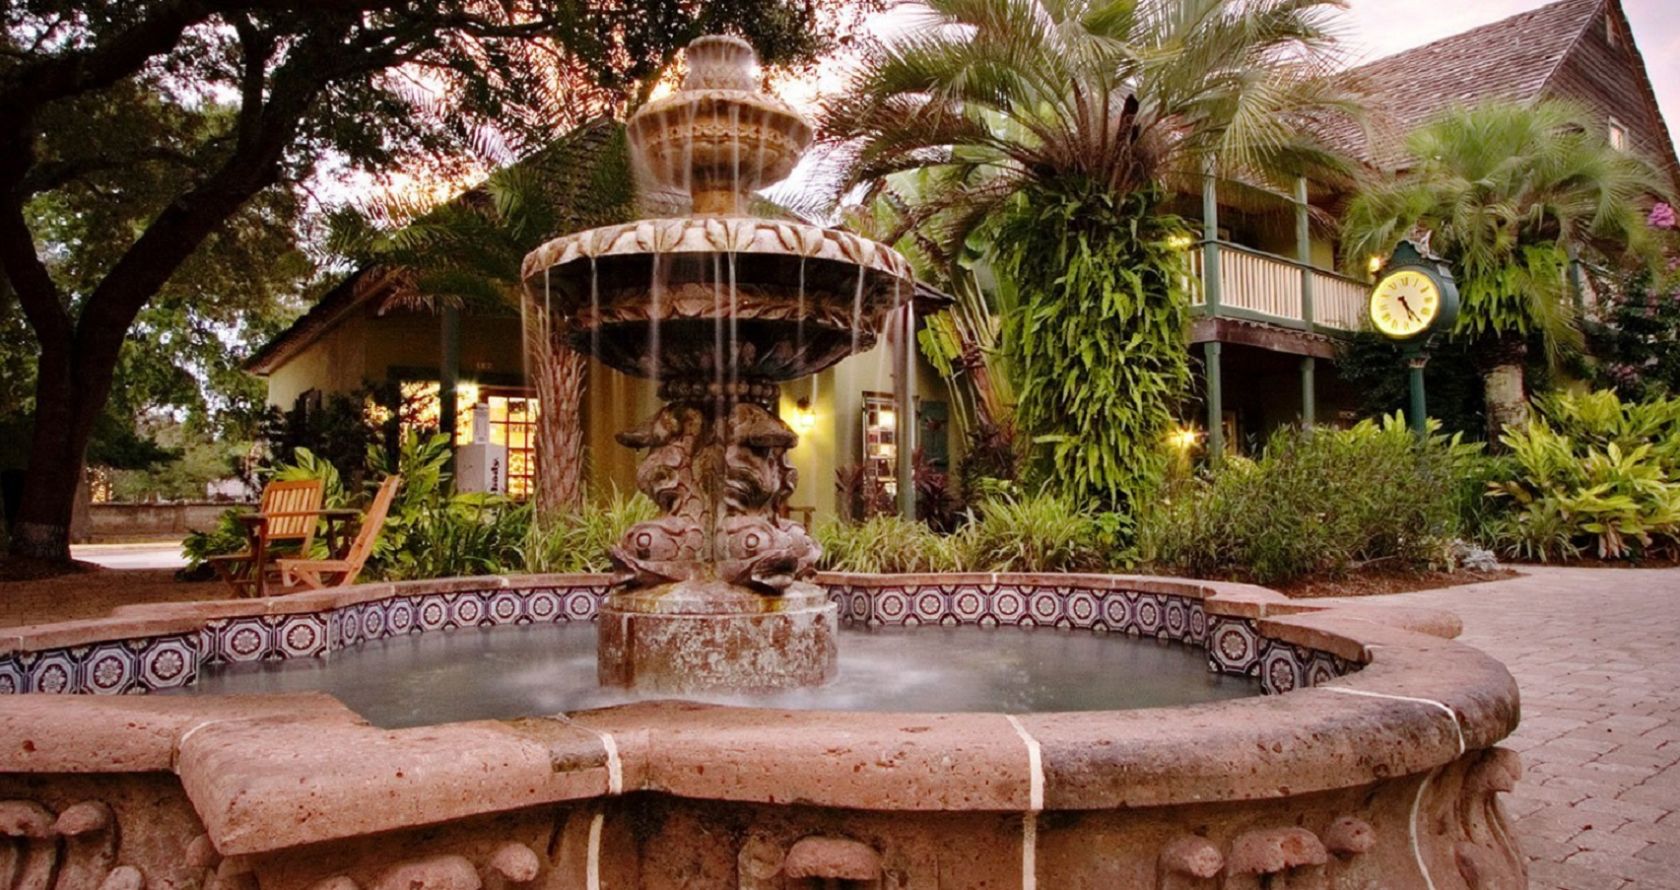 The Fountain in the Pedestrian Only Plaza in St. Augustine 